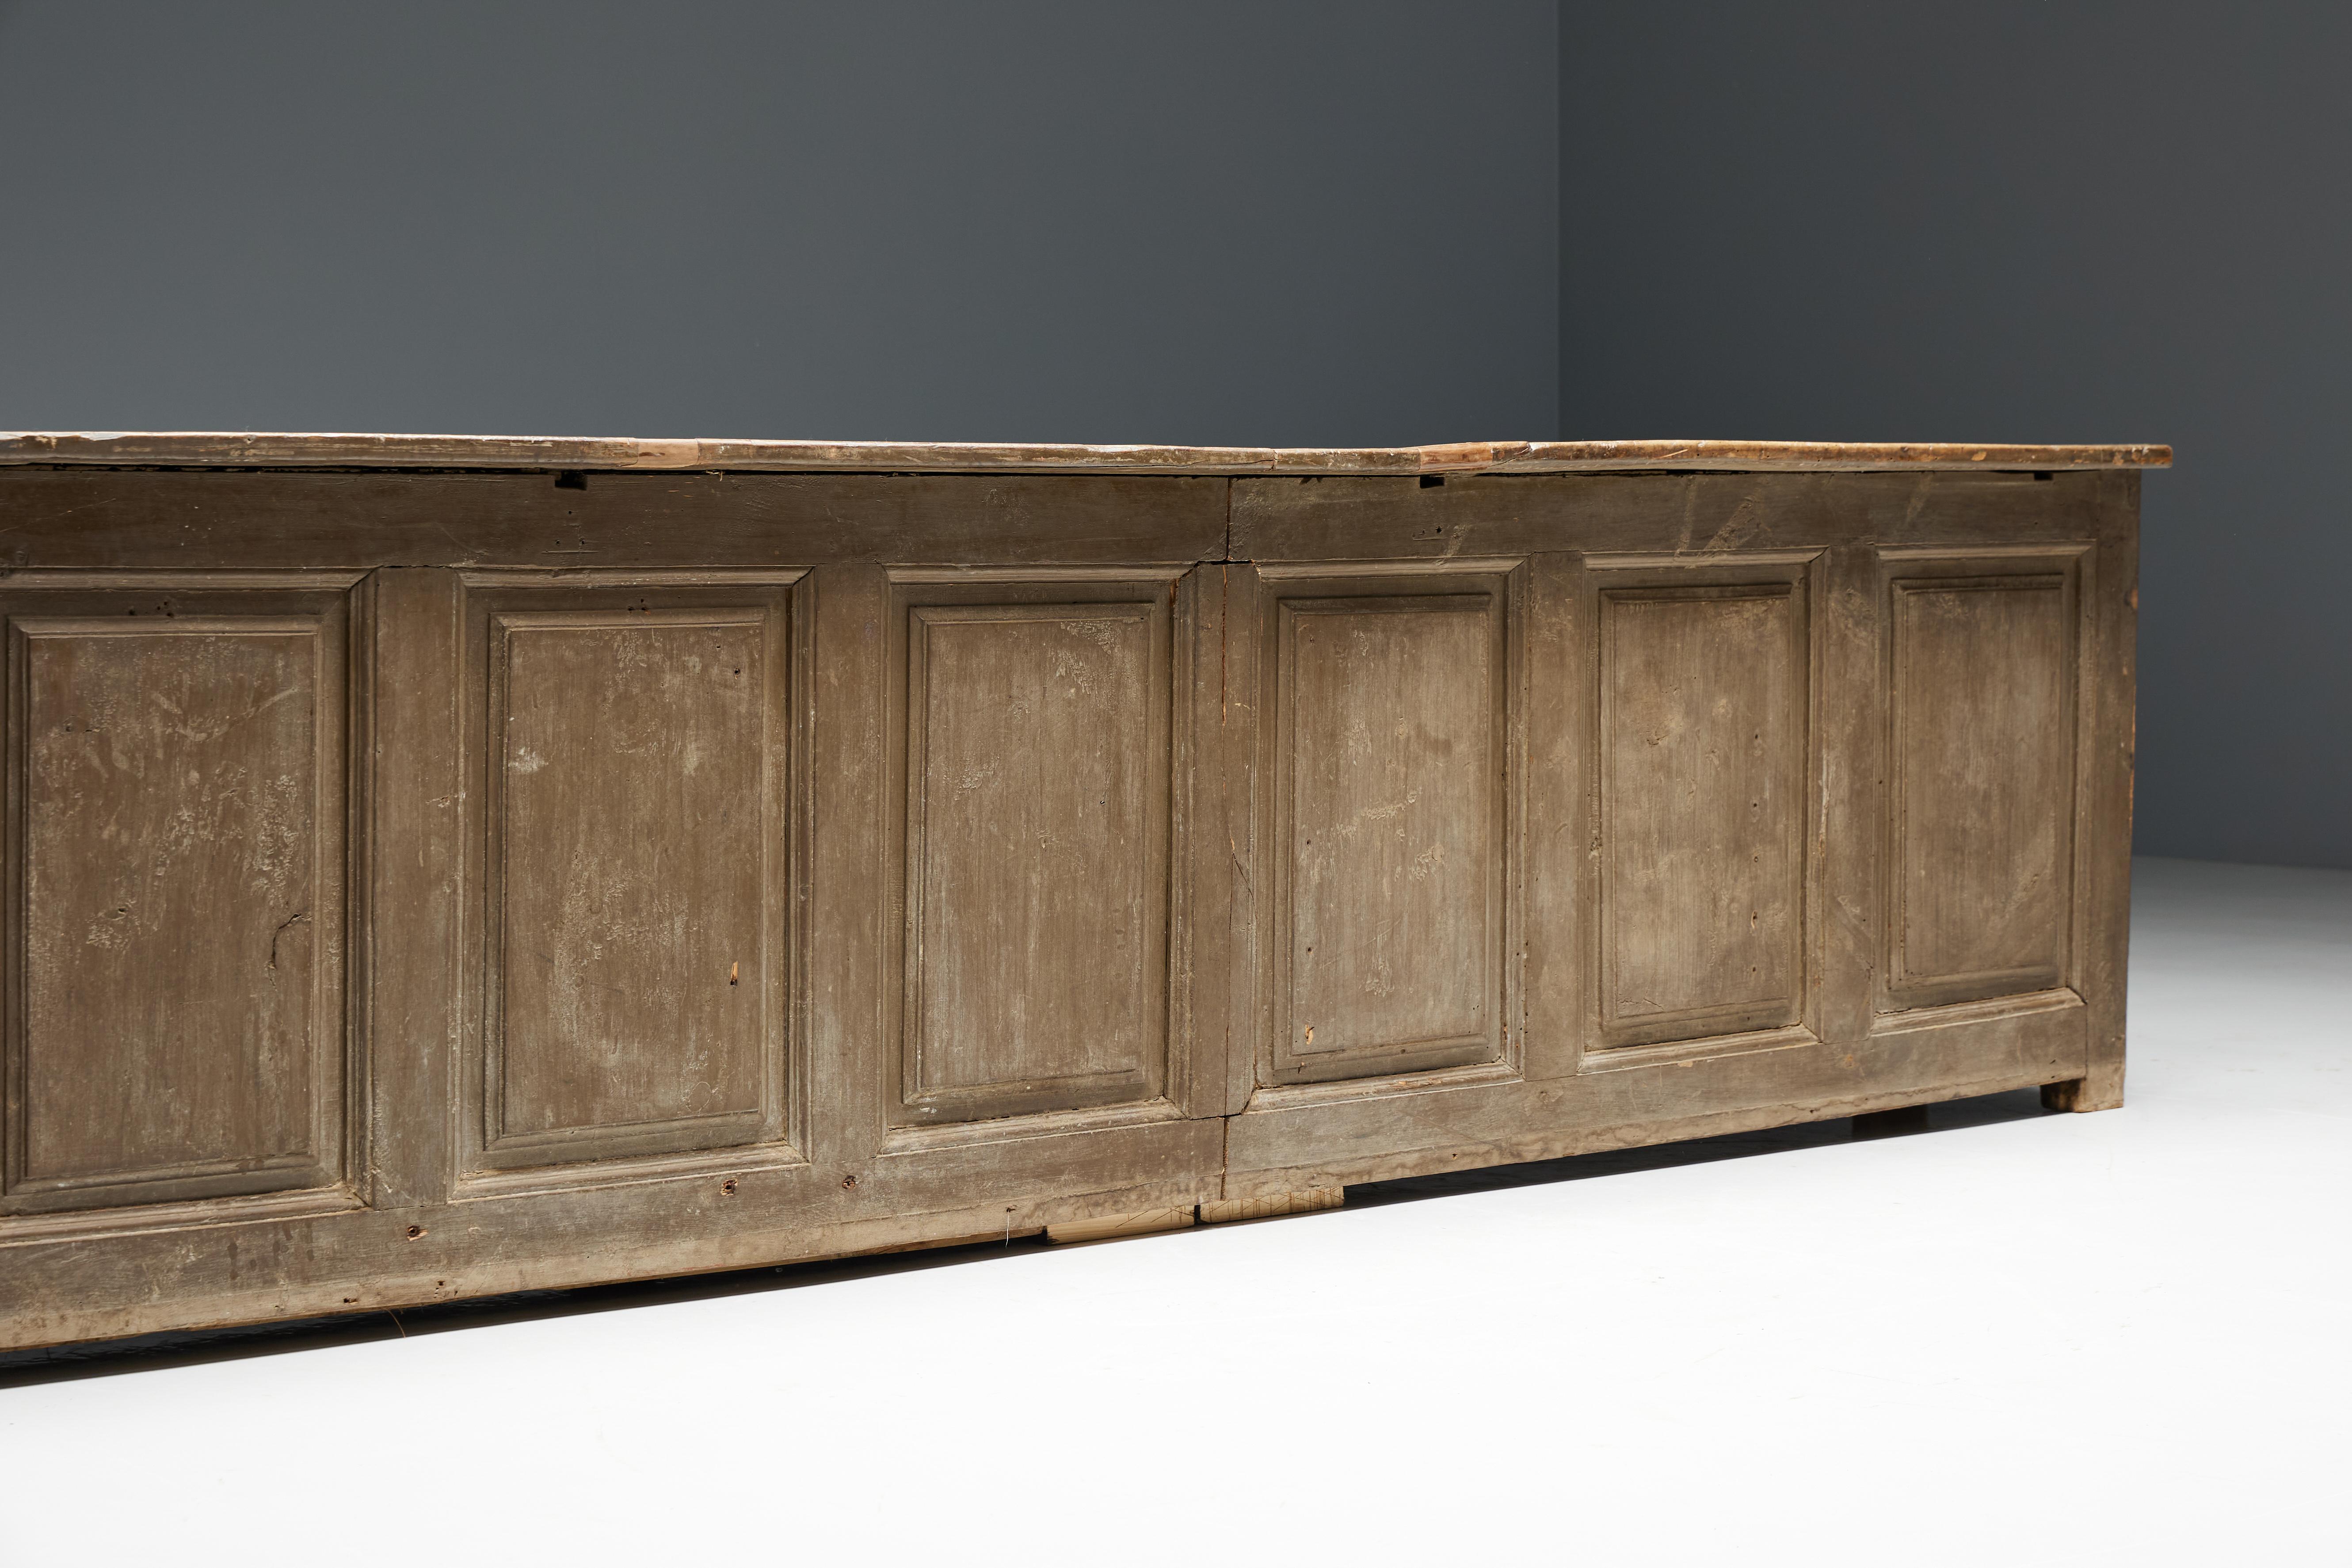 Rustic Art Populaire Freestanding Bar Counter, France, 19th Century 9